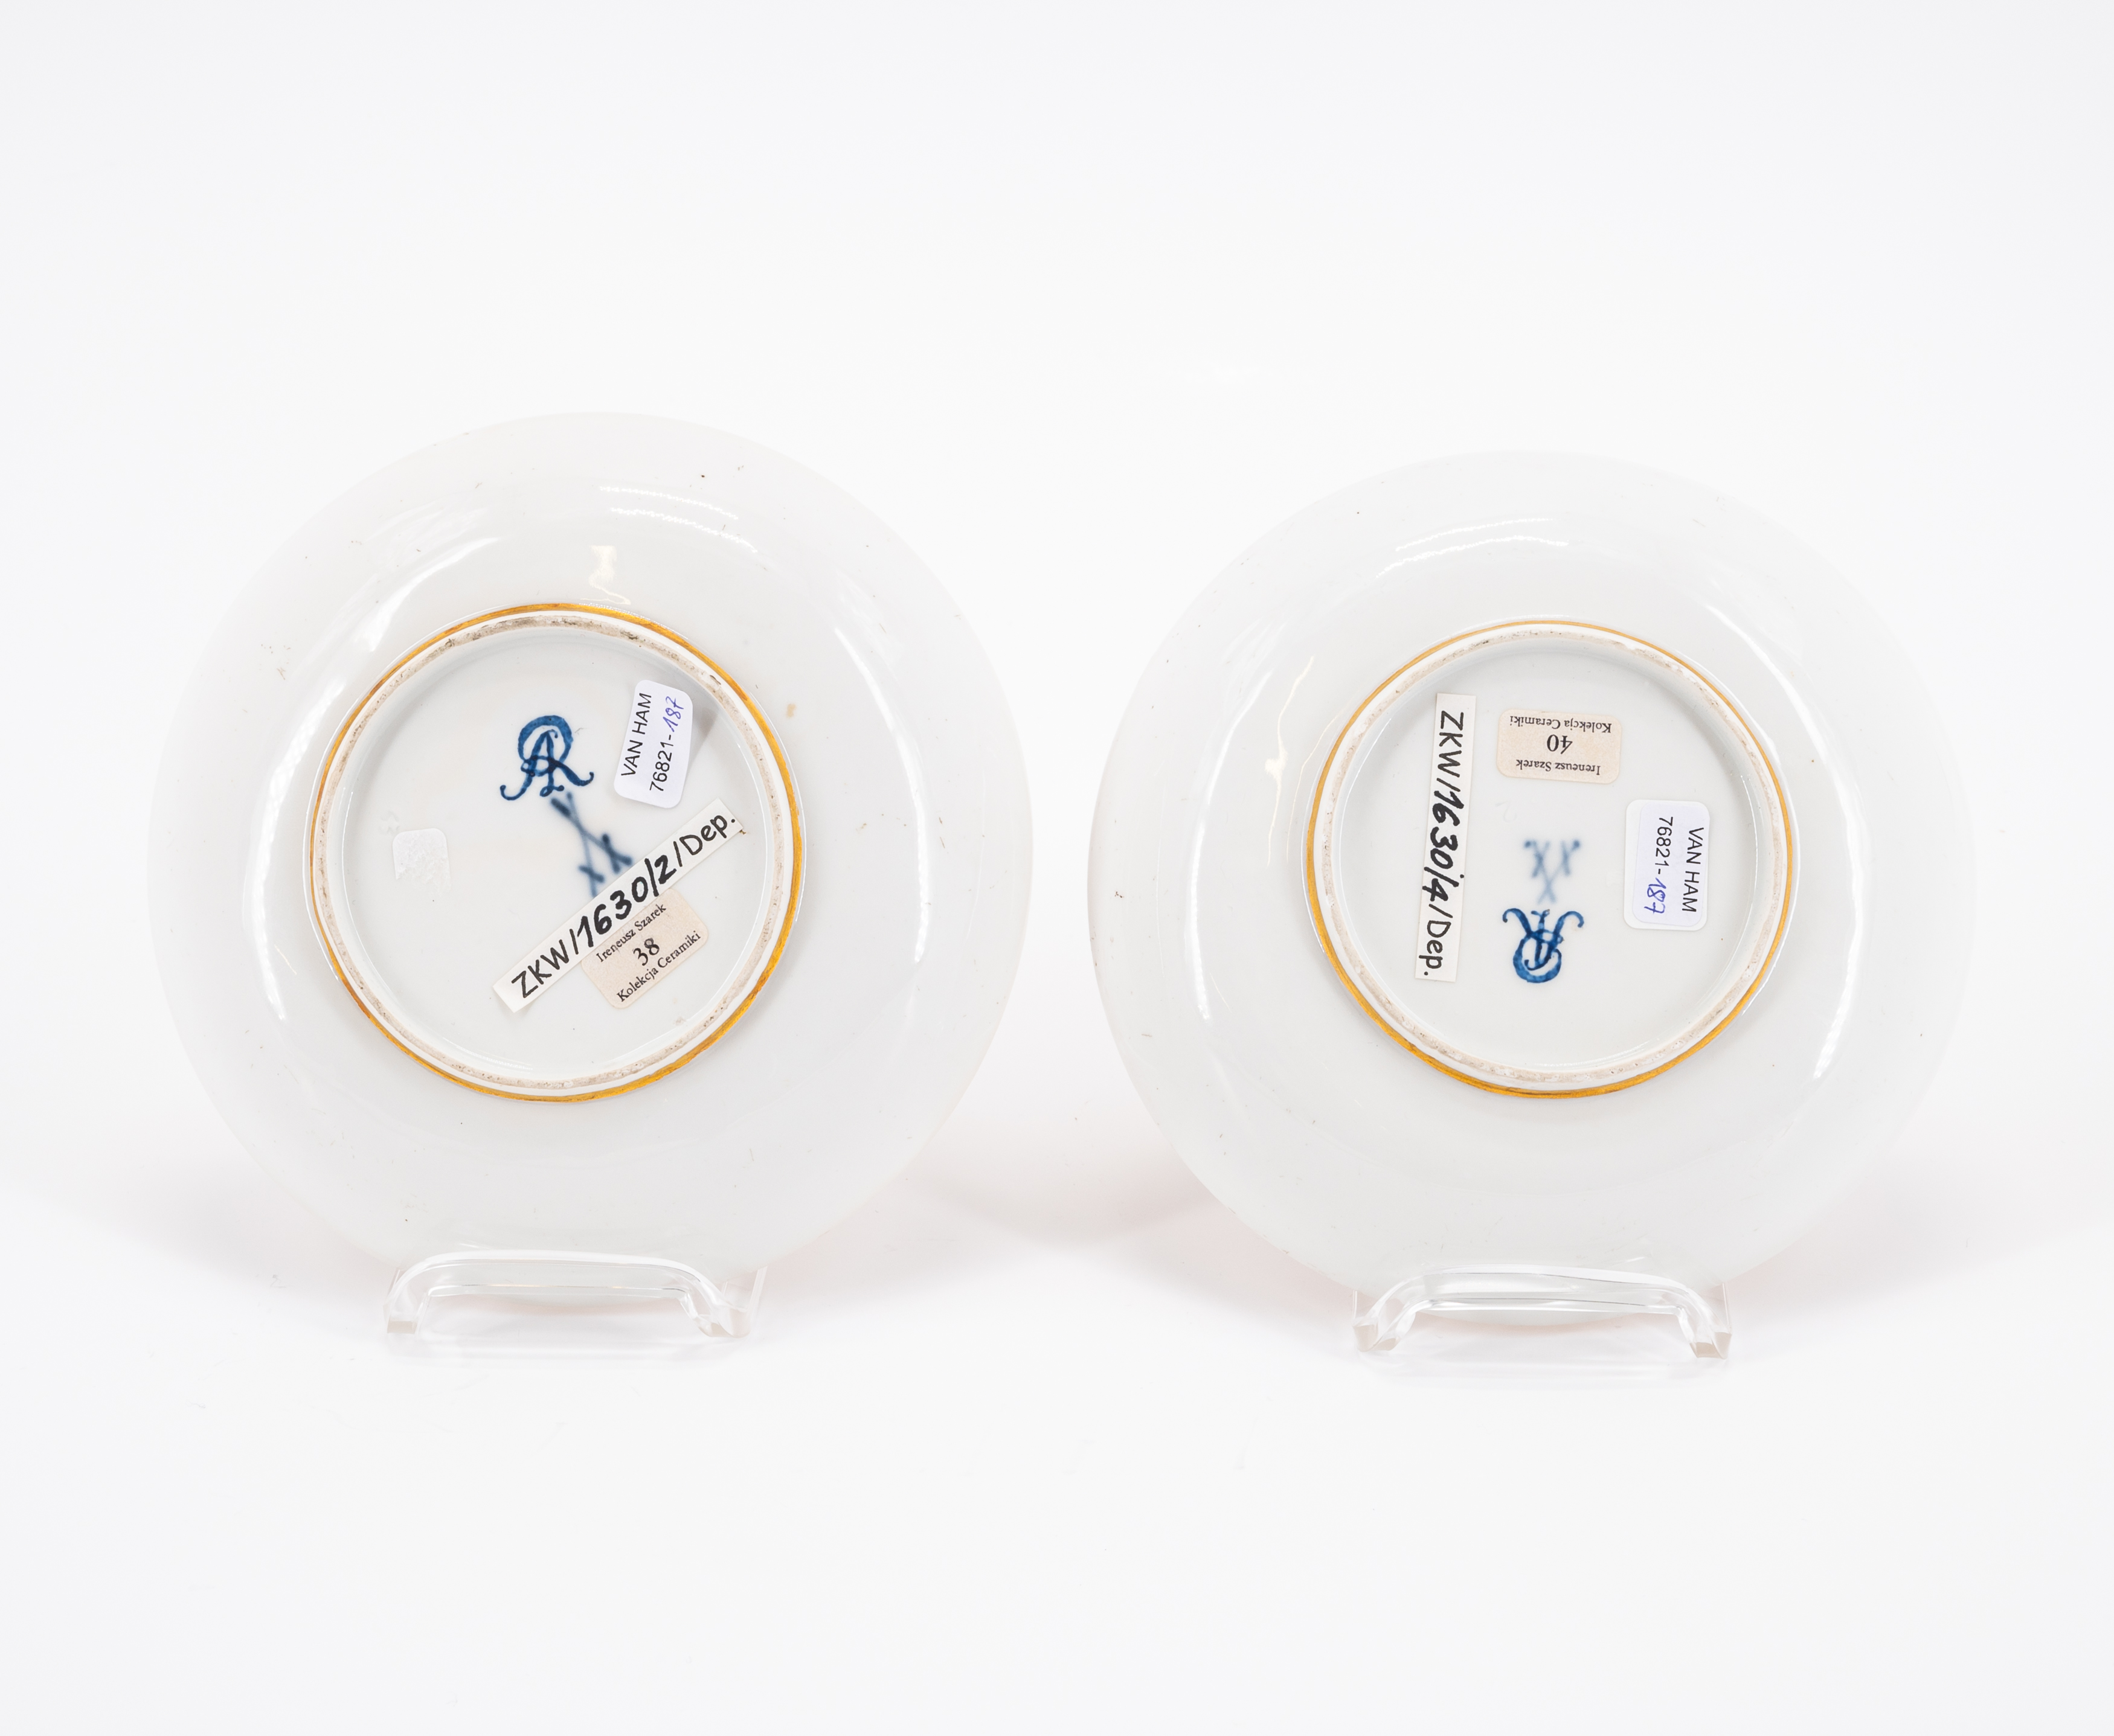 FOUR SMALL PORCELAIN PLATES WITH GOLD CONTOURED WATTEAU SCENES OUTLINES - Image 3 of 5